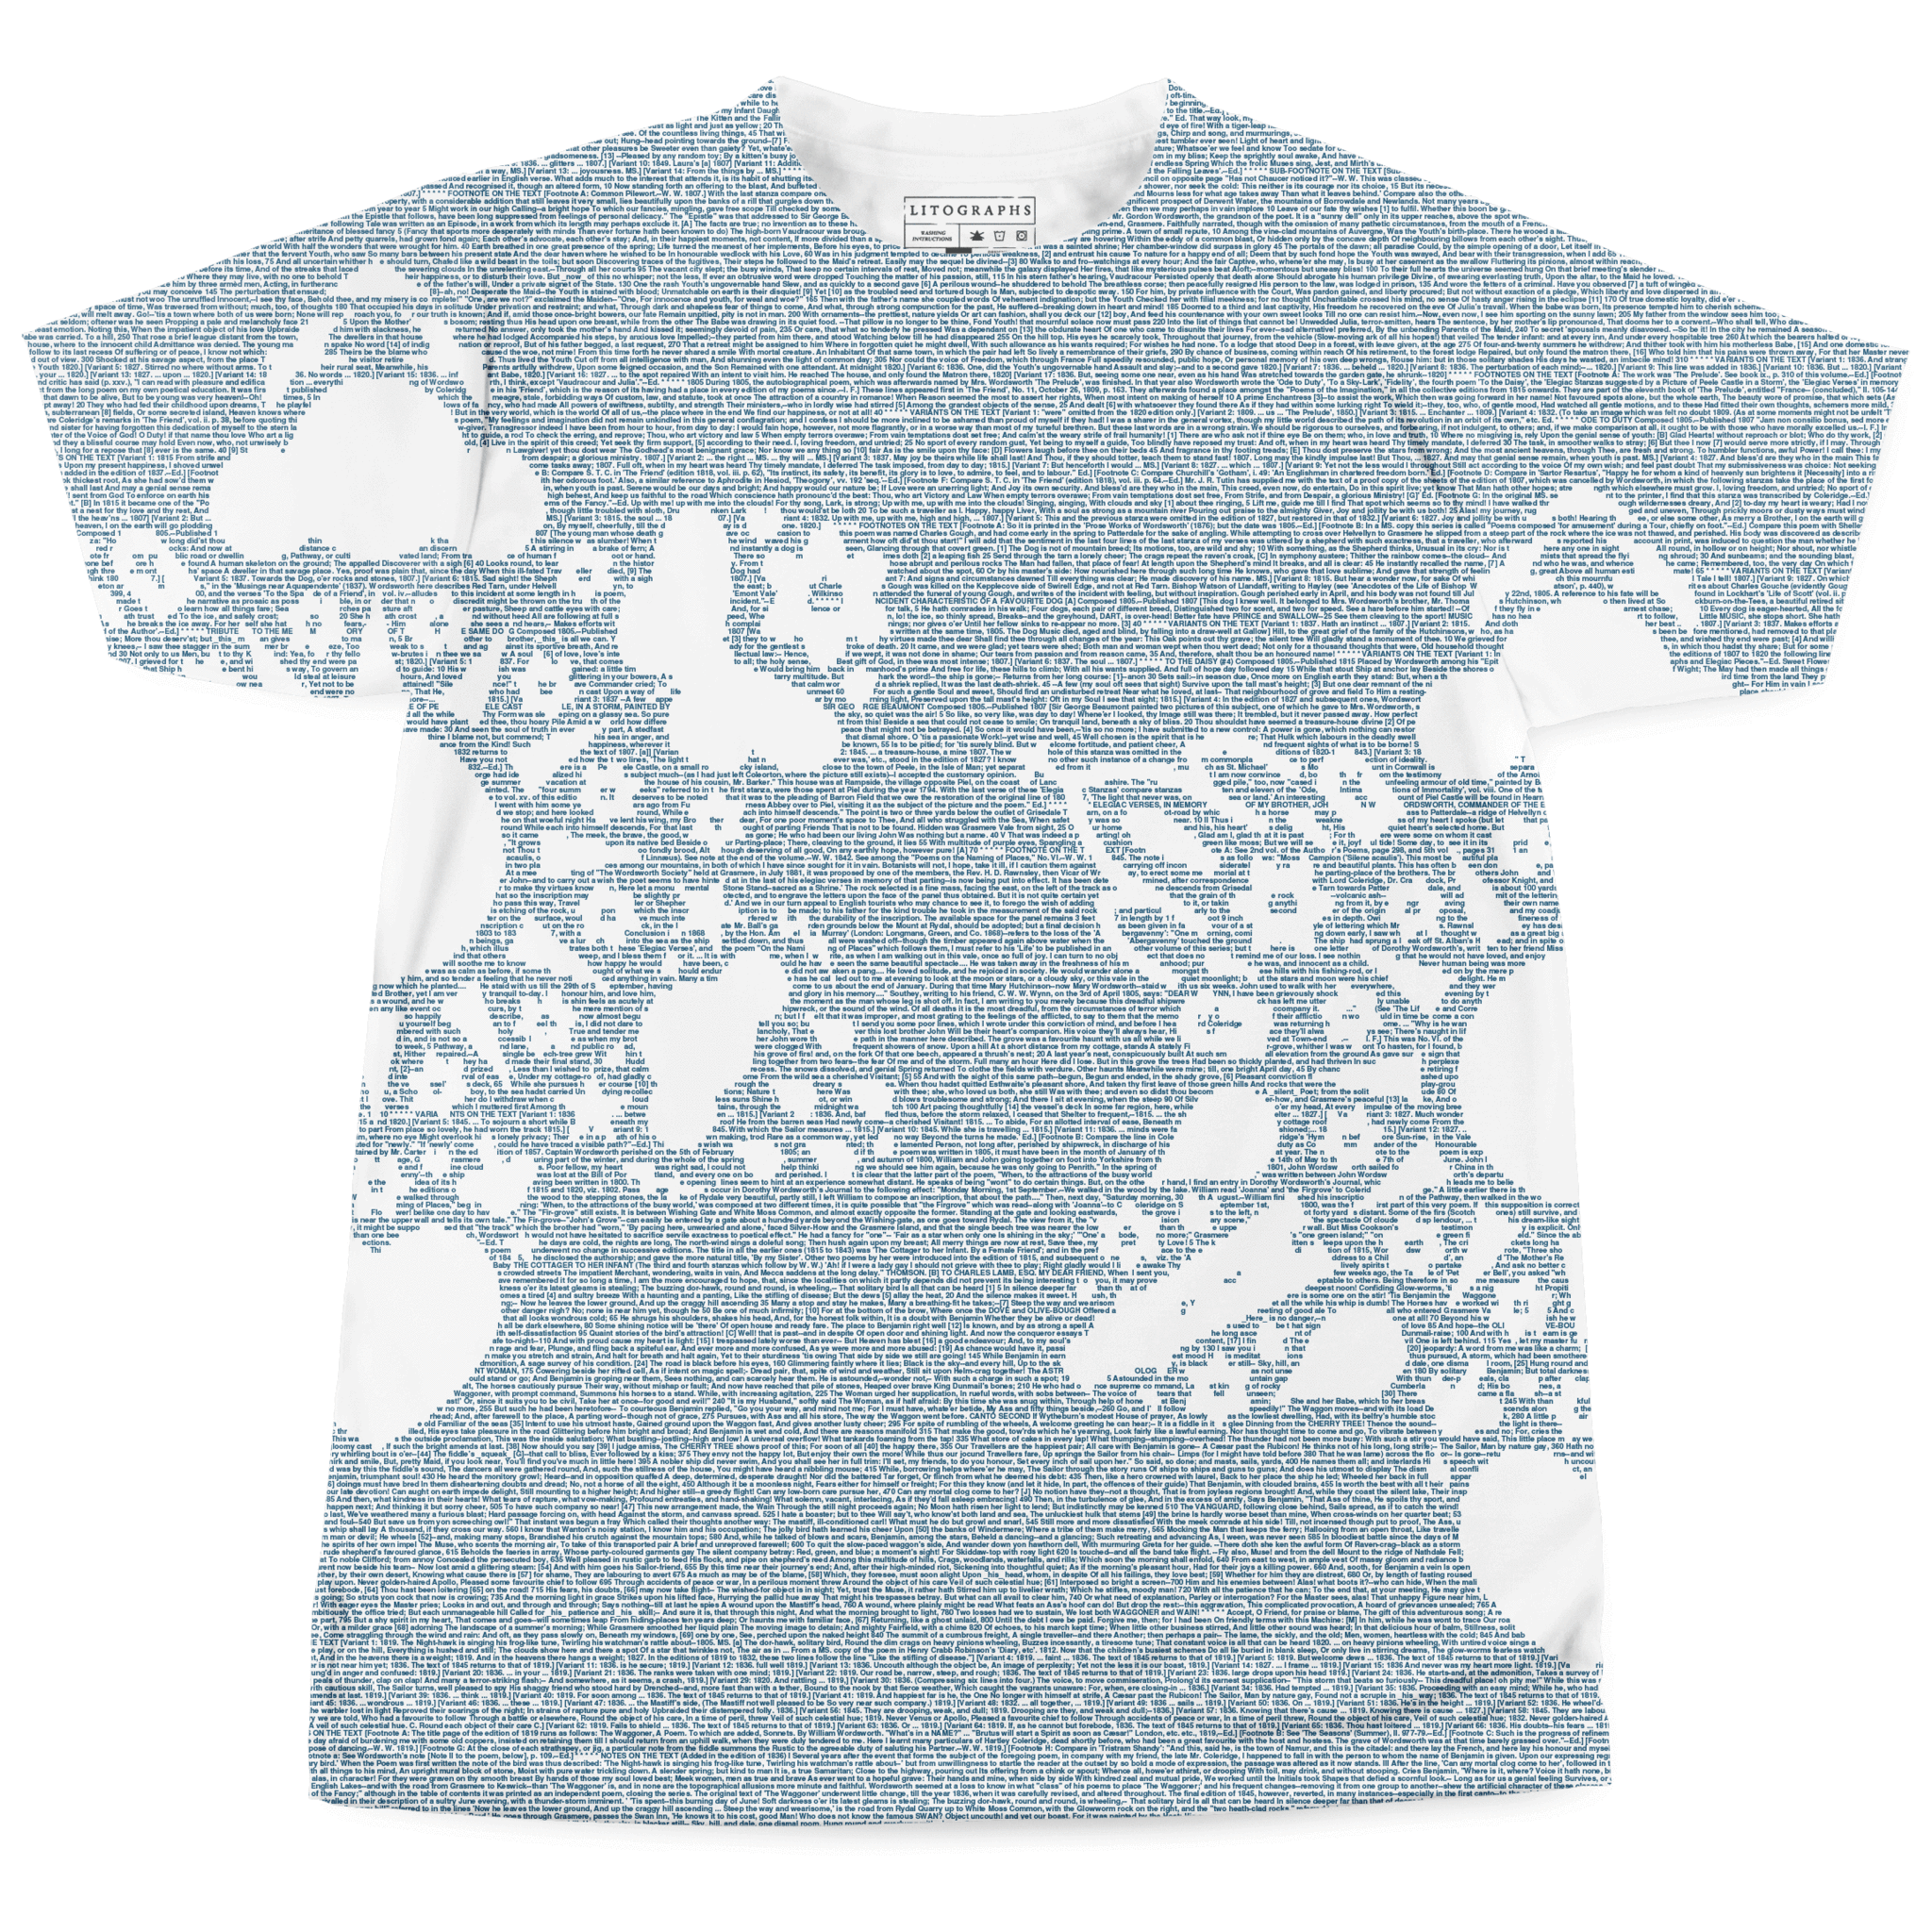 The Poetical Works of William Wordsworth by William Wordsworth - Entire Book on T-Shirt | Best Gift for Readers and Book Lovers | Litographs